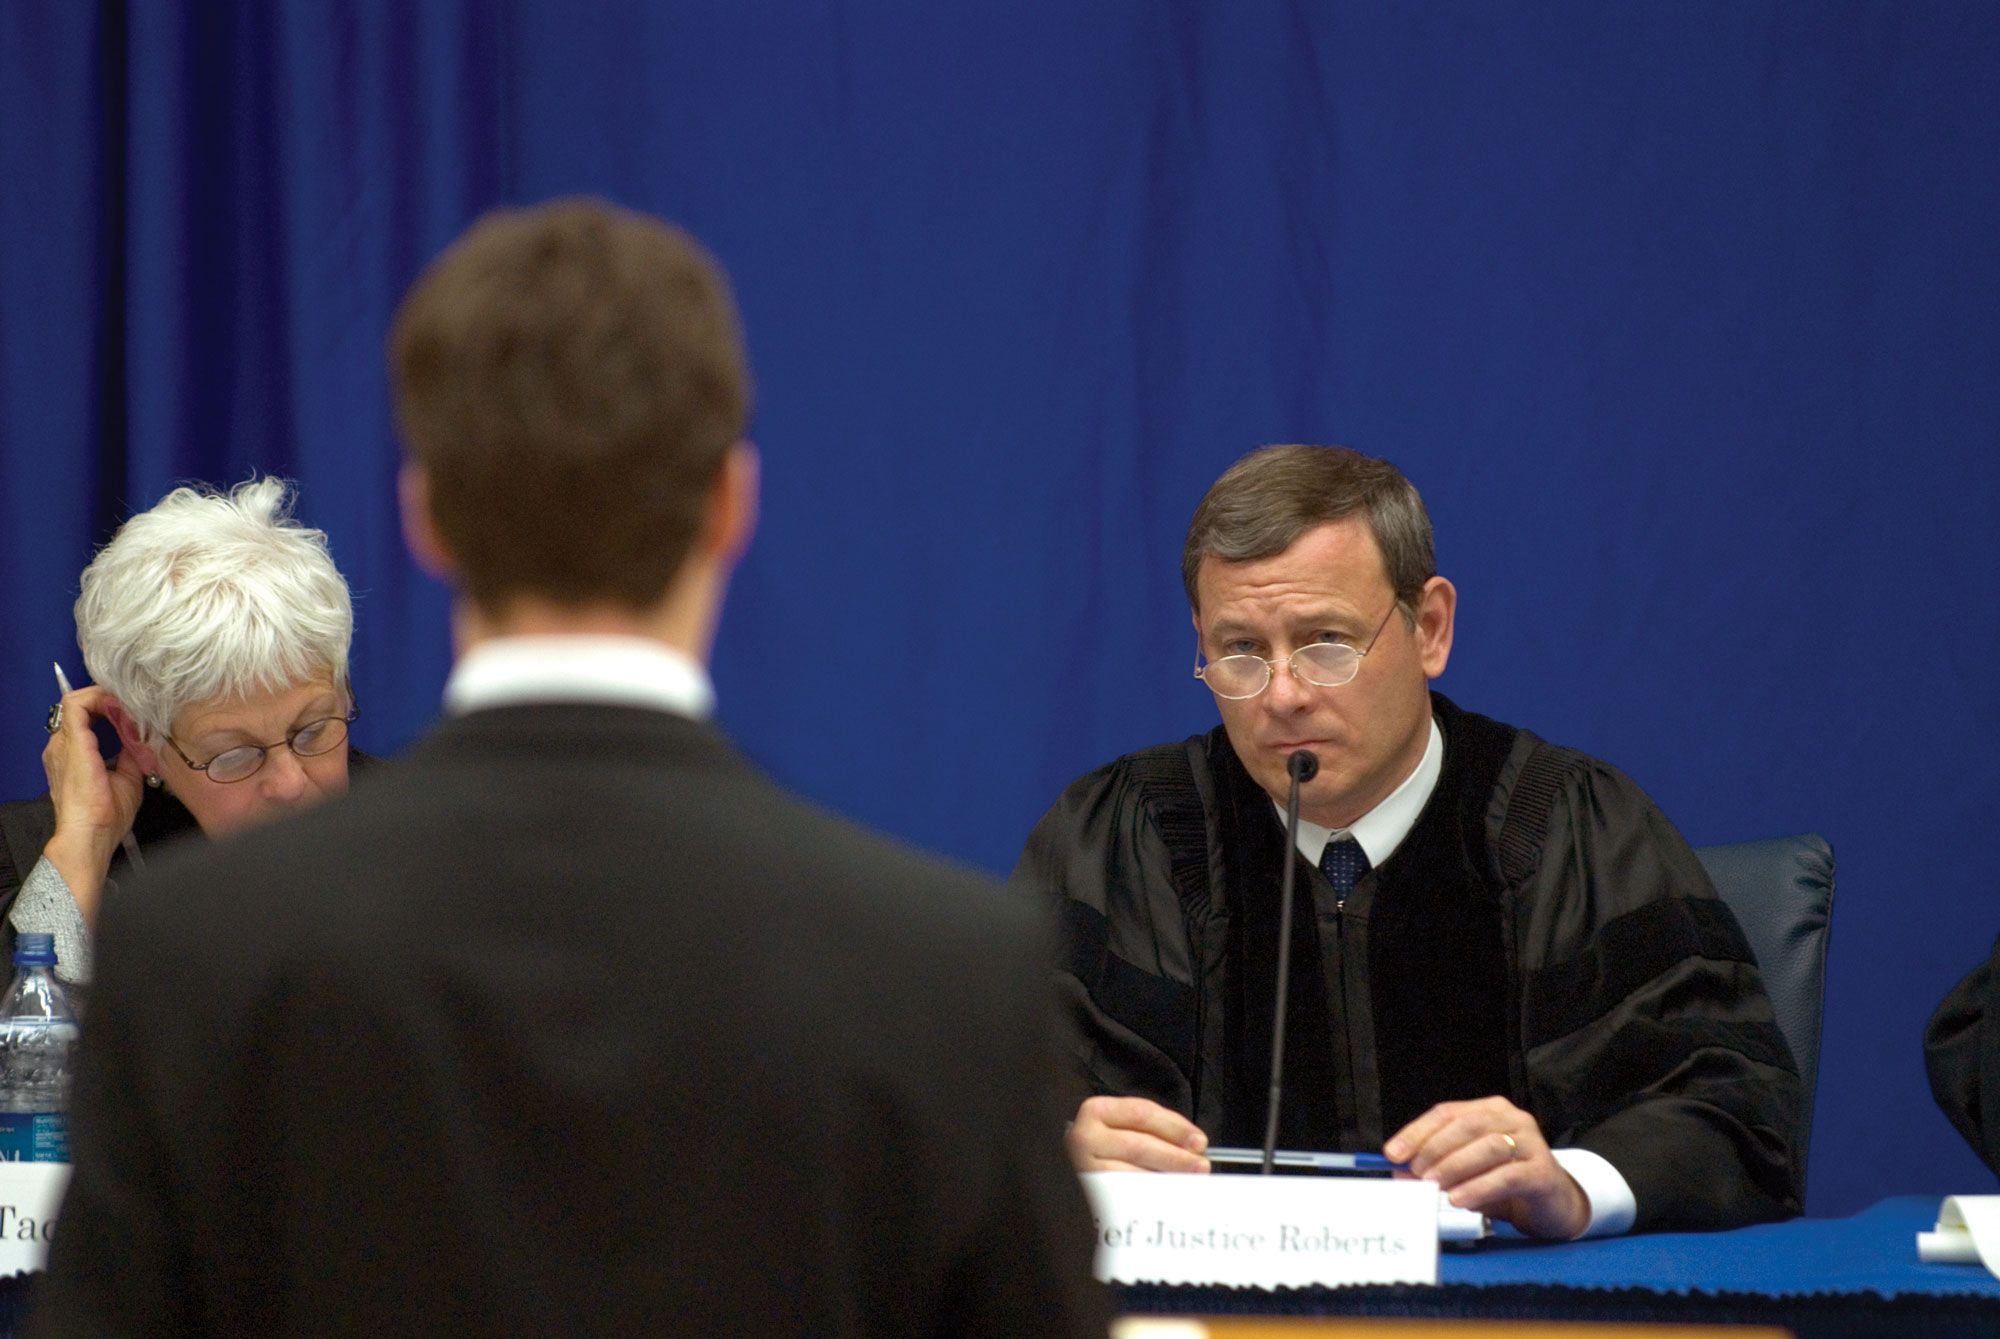 Chief Justice John G. Roberts judges a moot court competition at KU Law. Judge Roberts is pictured in front of a blue background. 